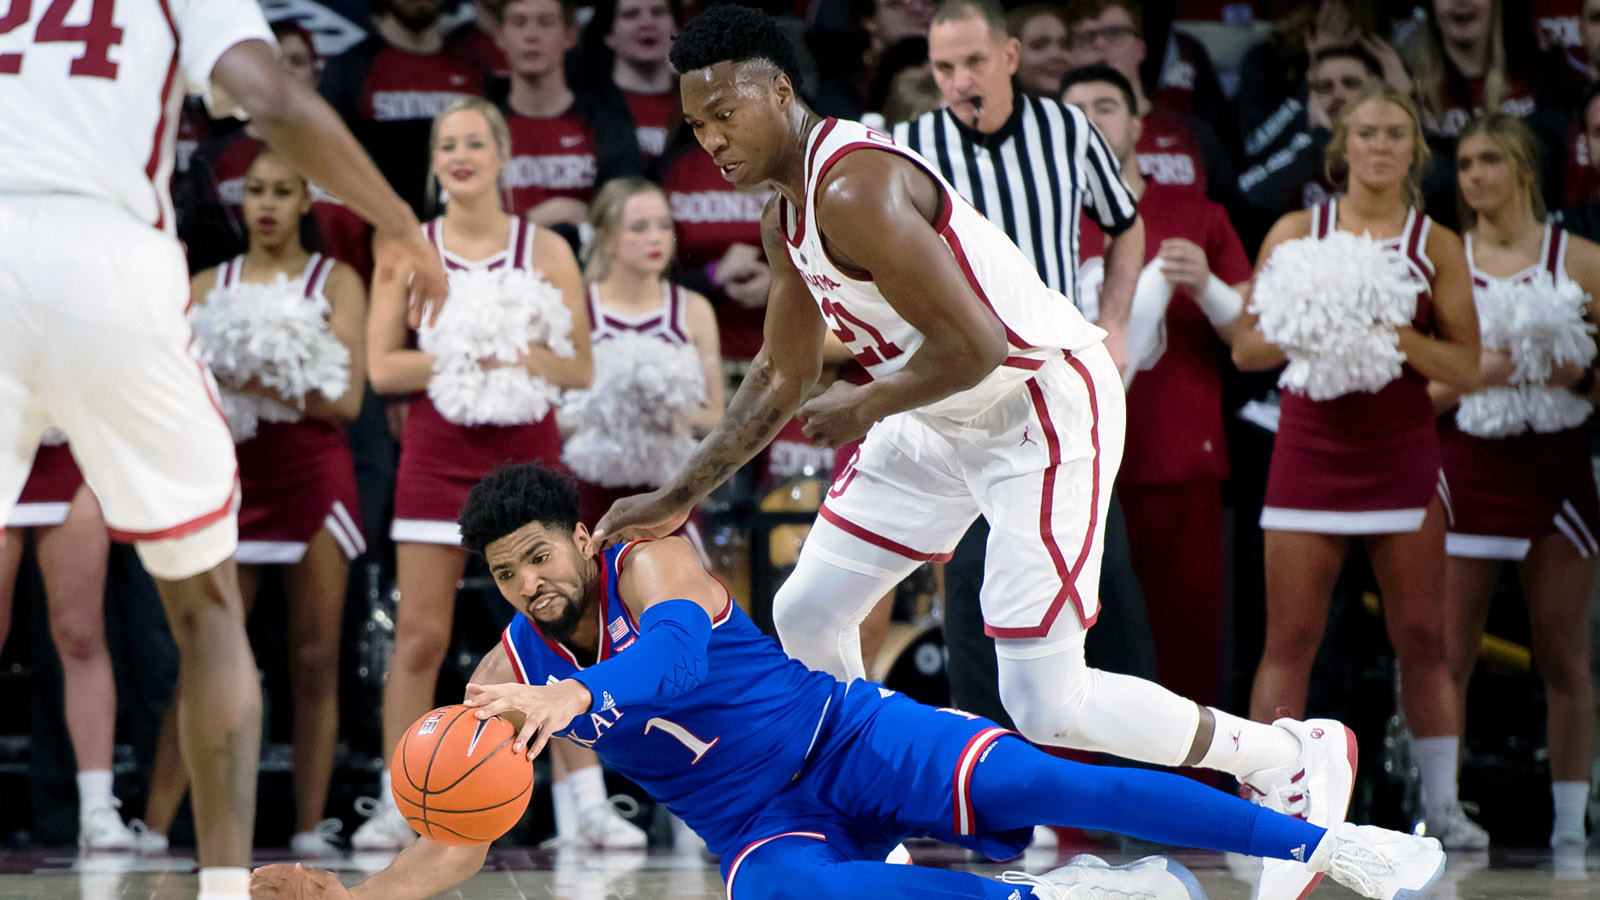 Kansas' Big 12 title streak ends at 14 years with 81-68 loss to Oklahoma